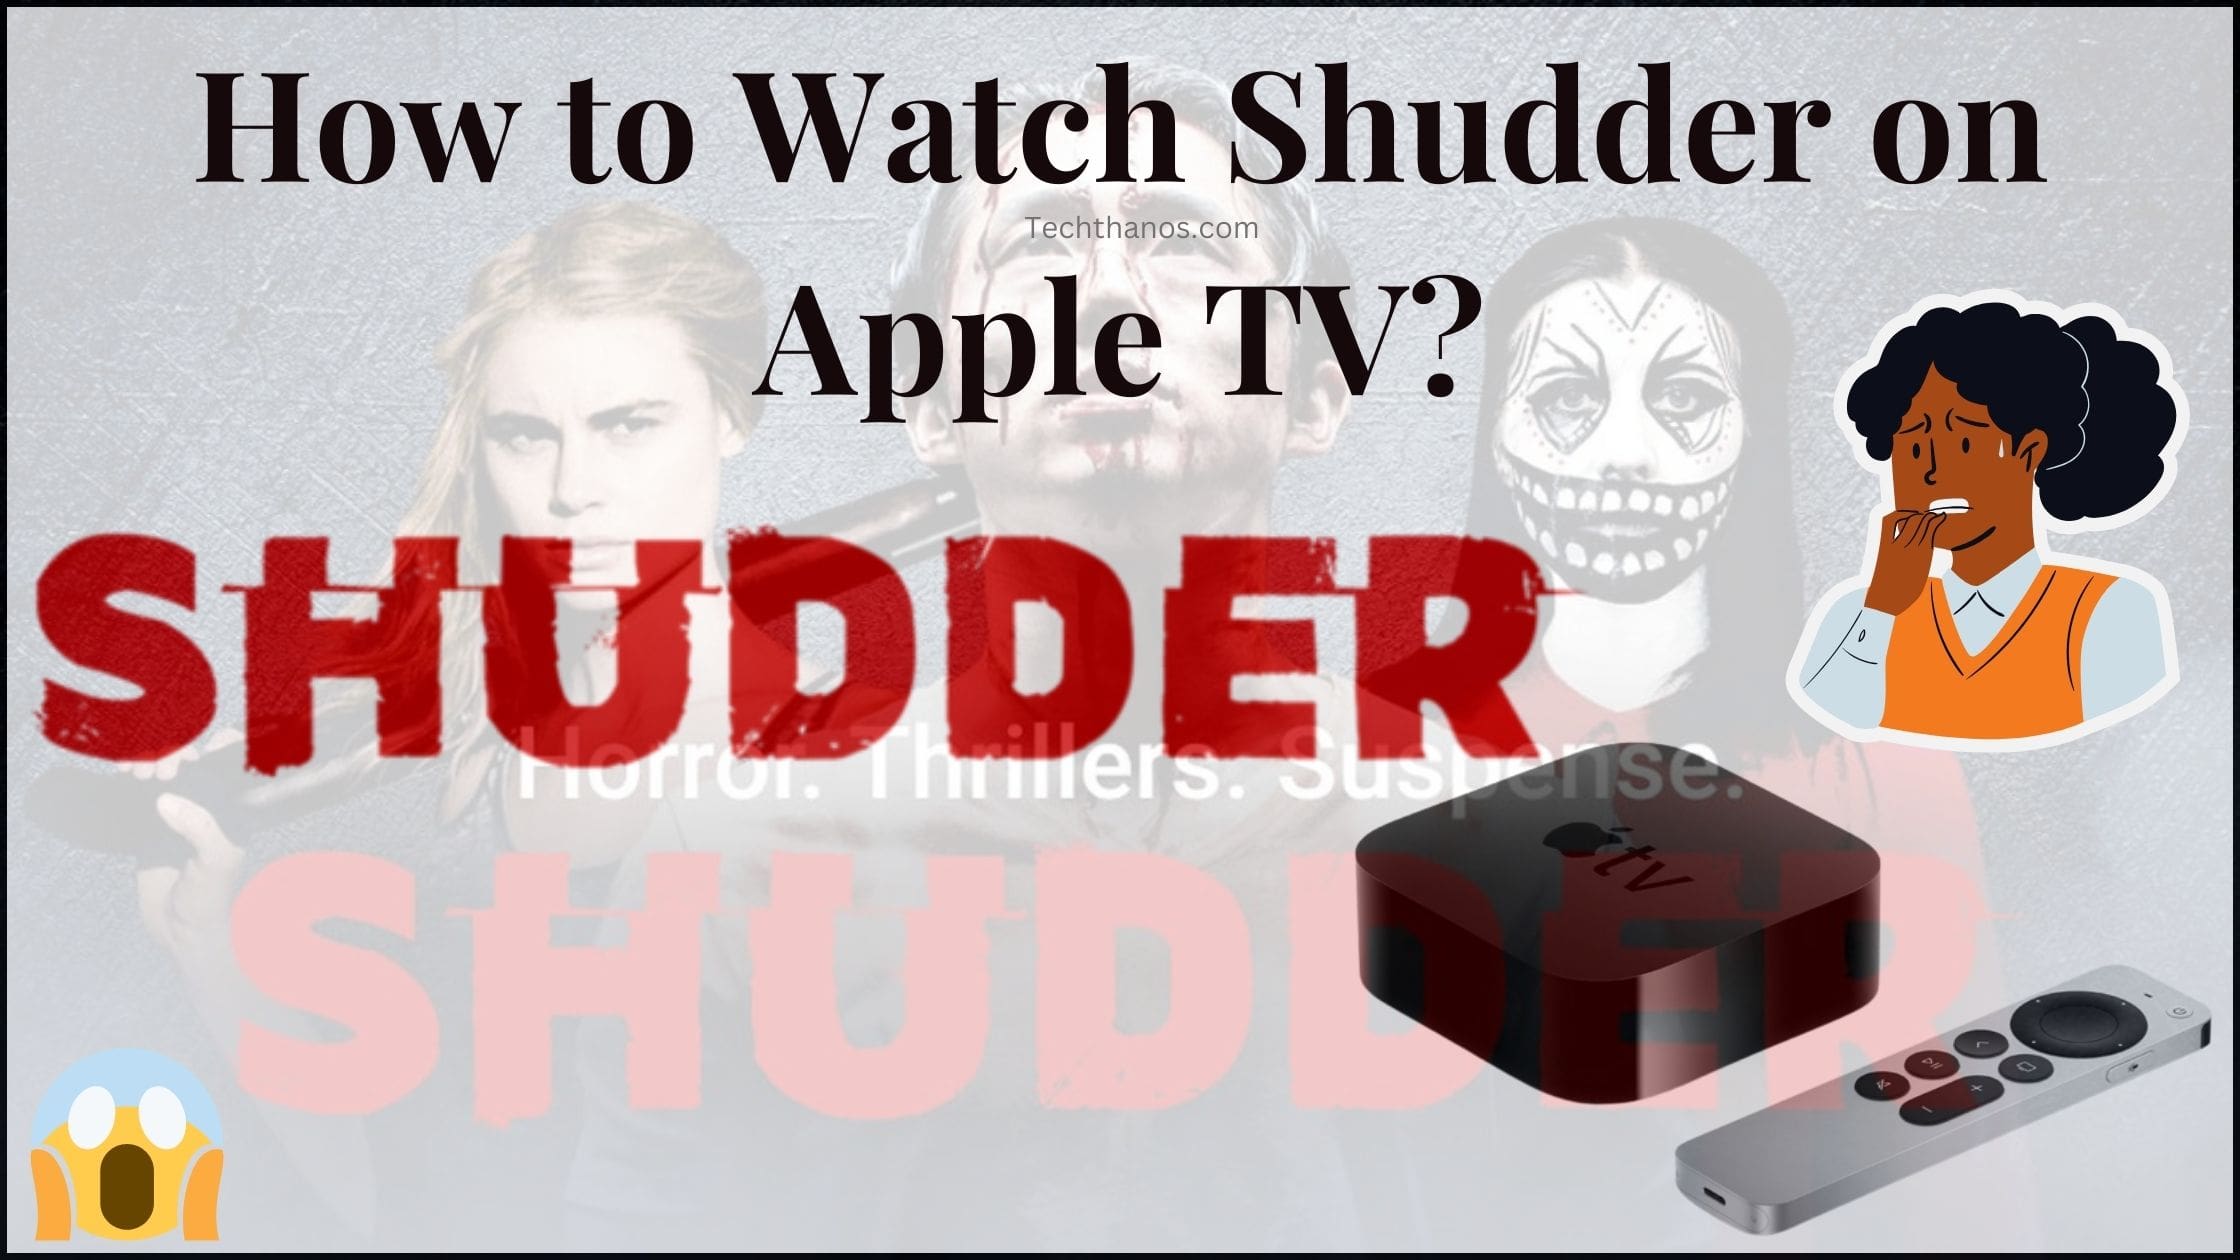 How to Watch Shudder on Apple TV?